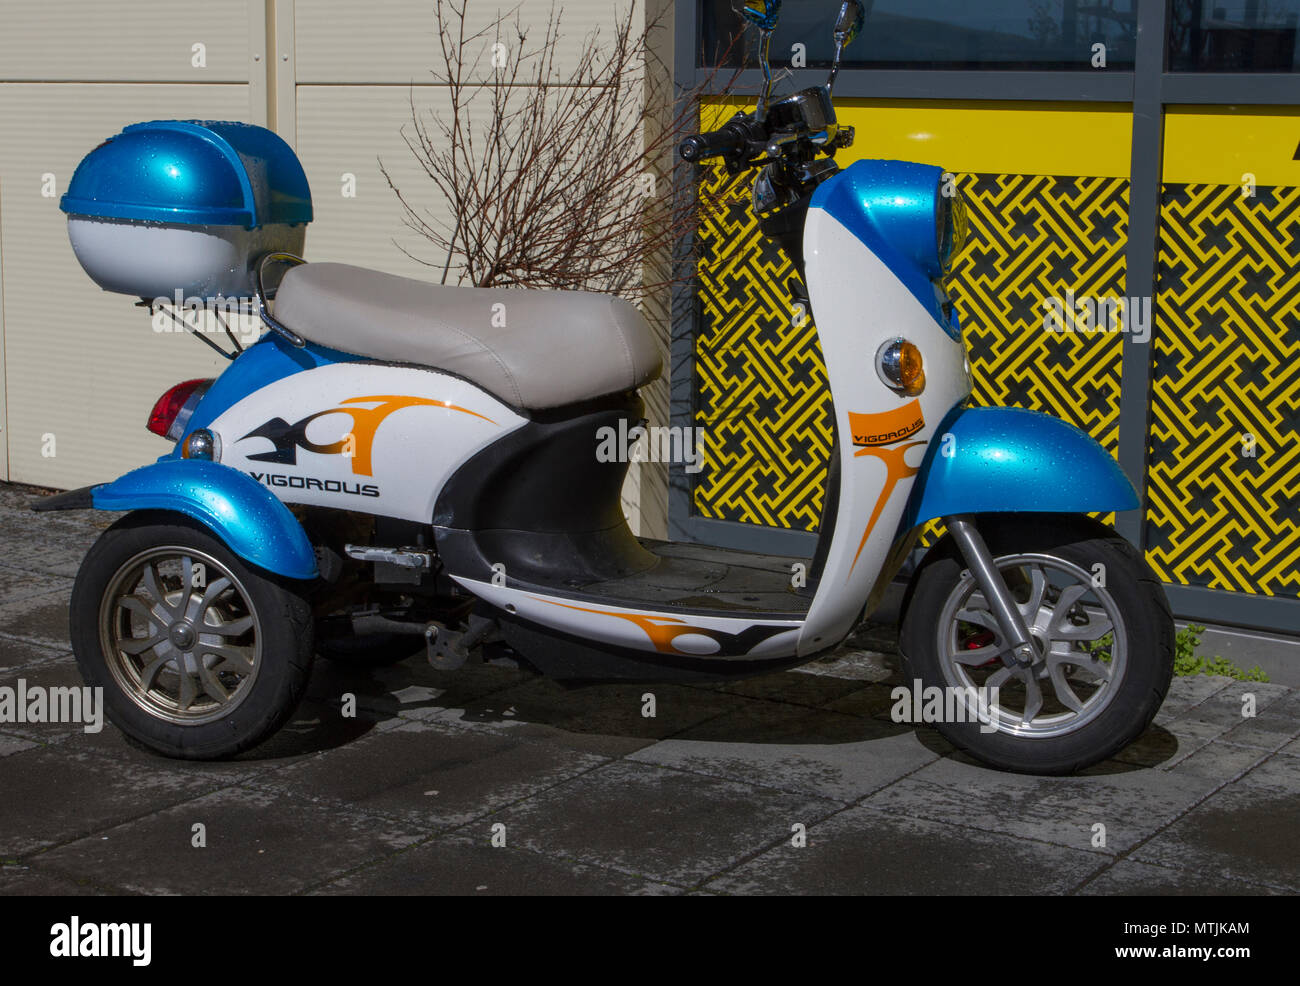 Blue Vigorous Scooter, electric tricycle in Iceland Stock Photo - Alamy